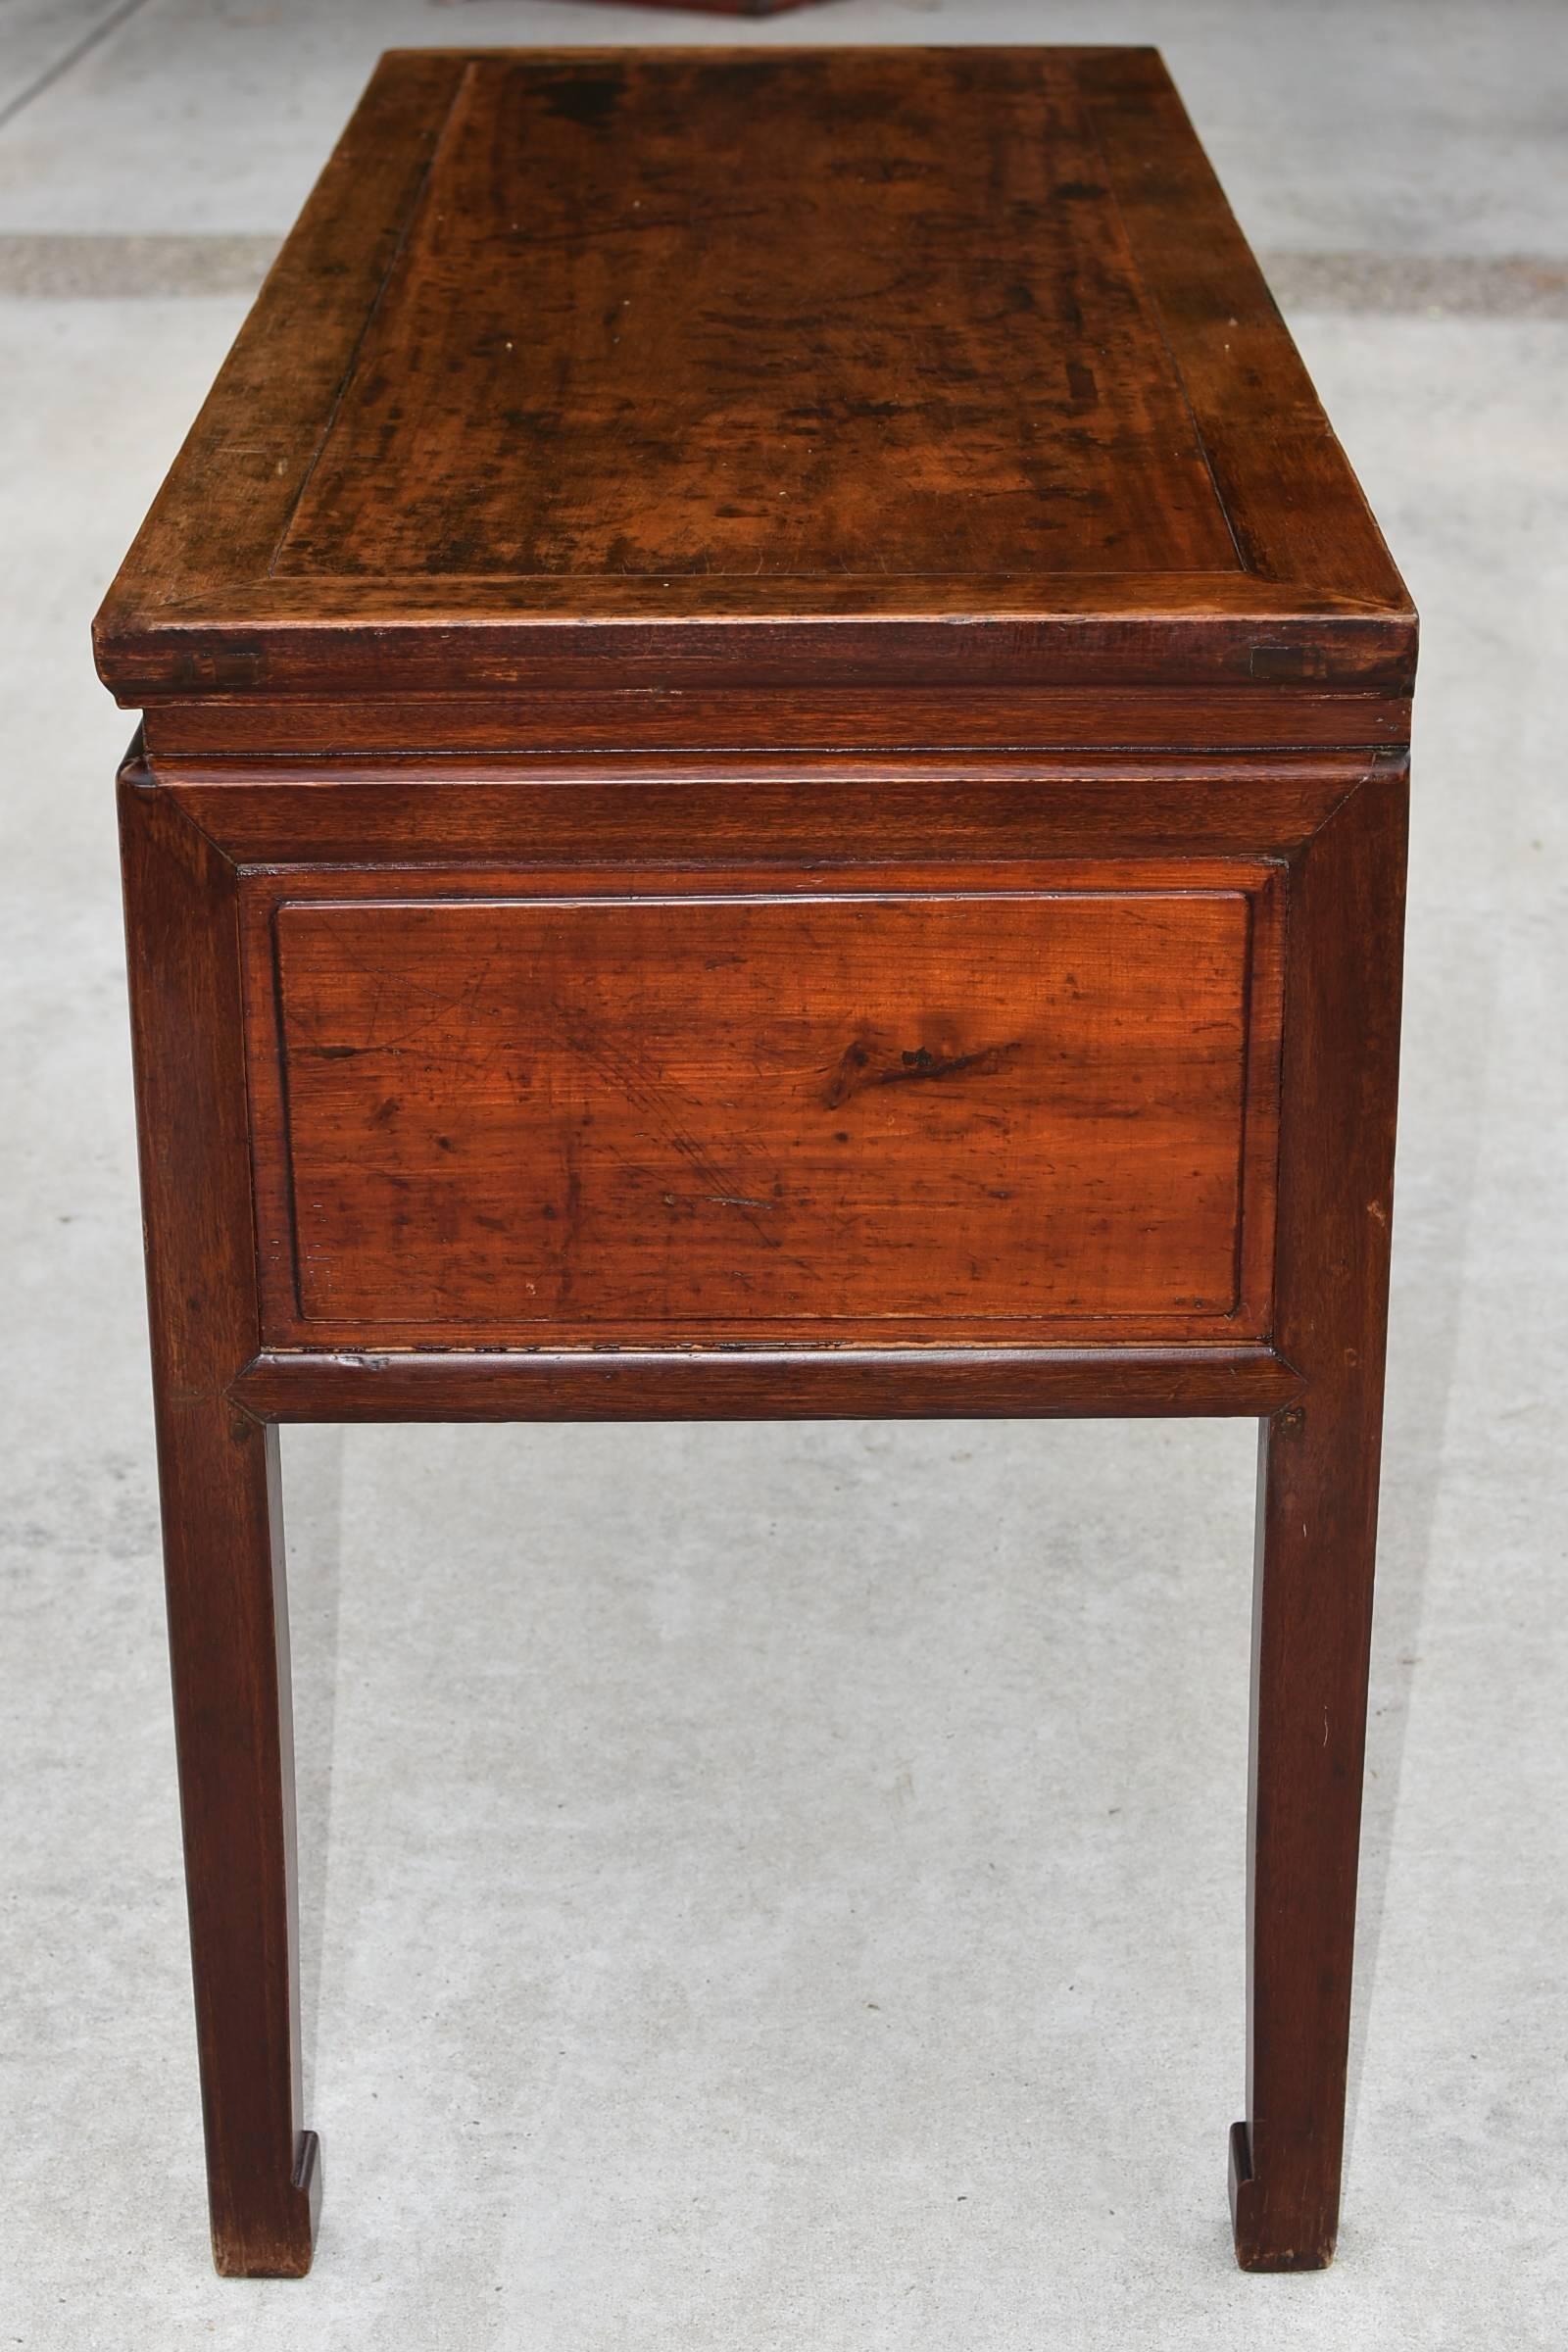 Antique Accountant's Desk, Chinese Solid Wood Desk 1